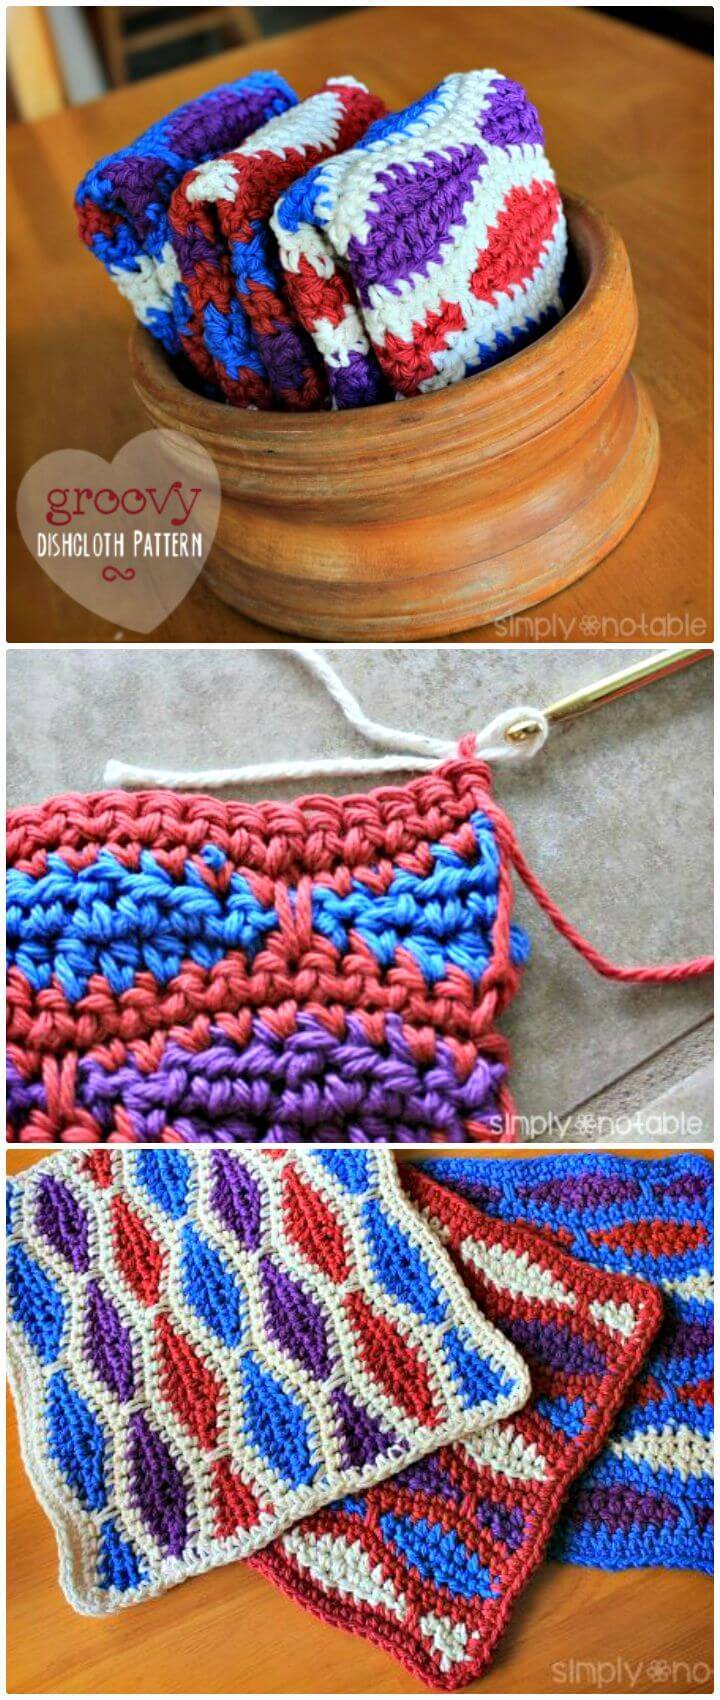 How To Crochet A Groovy Dishcloth - Free Pattern